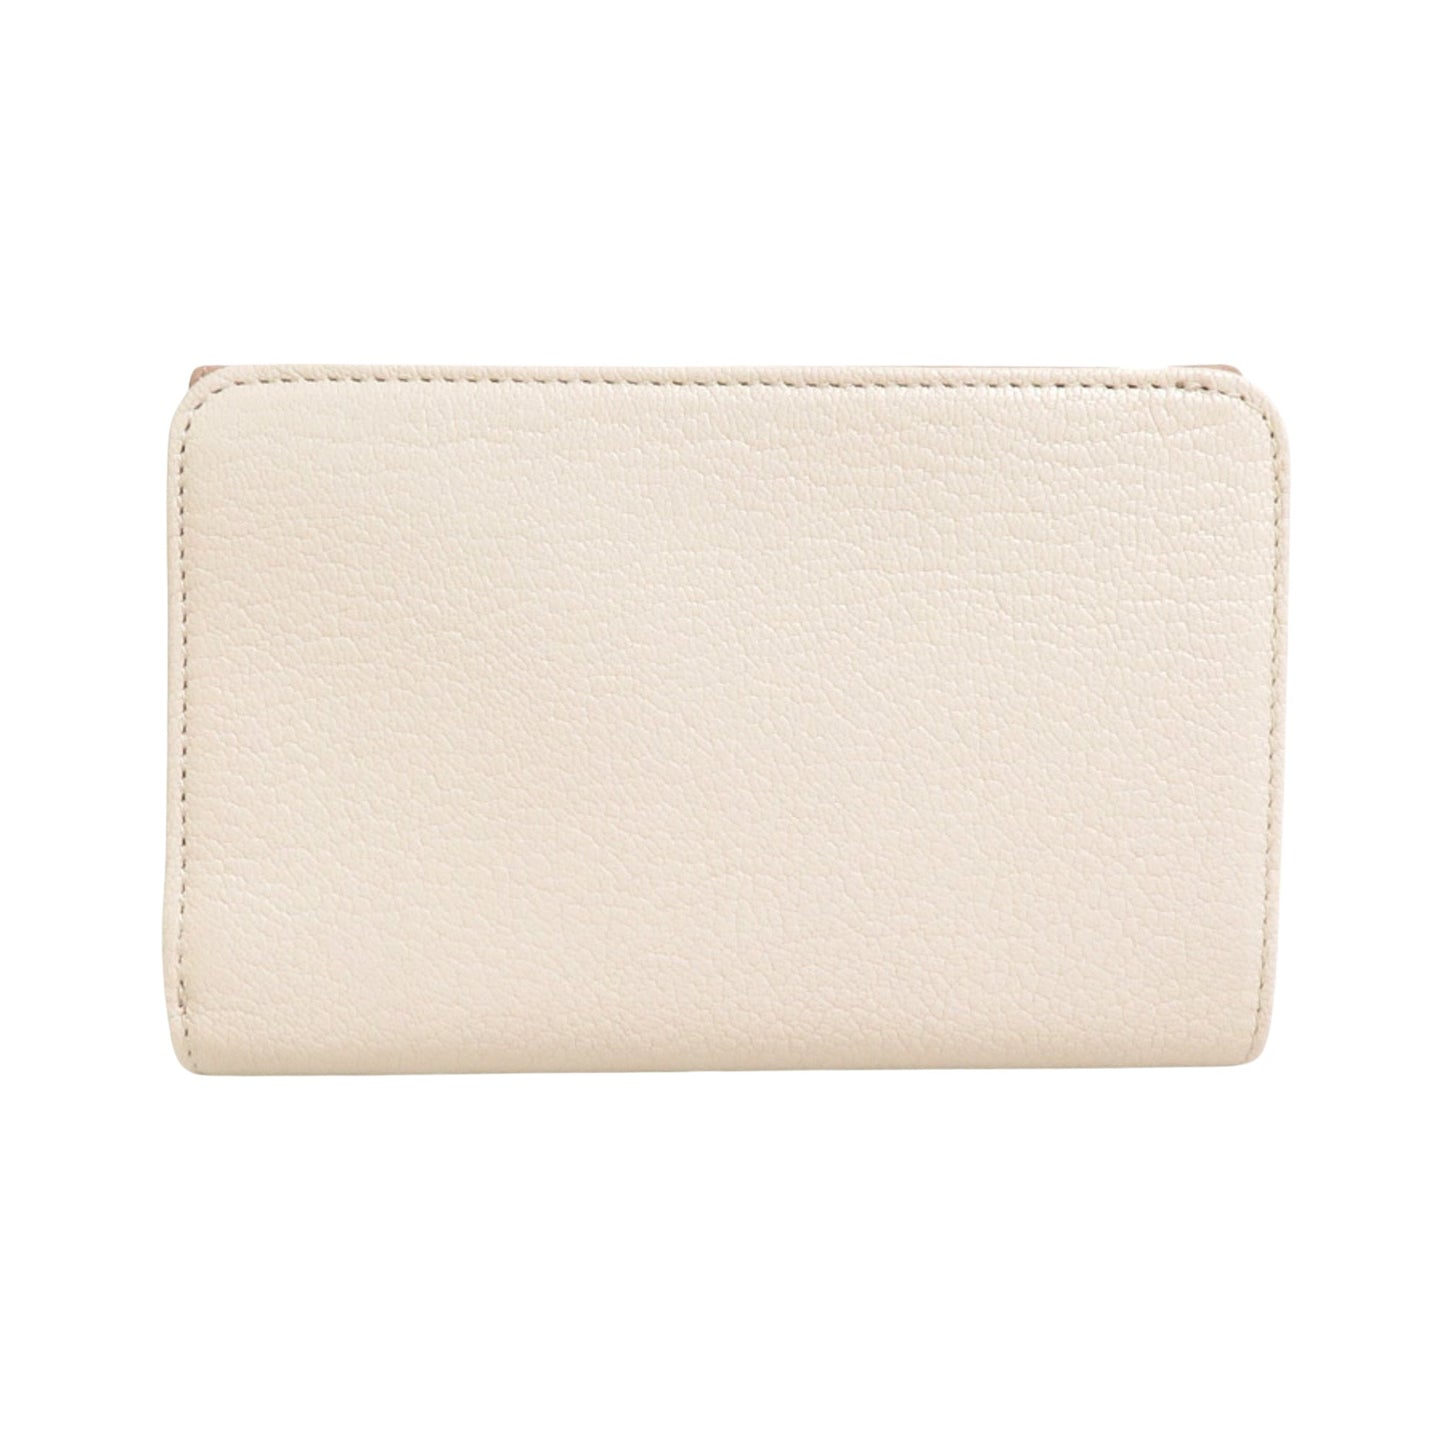 Miu Miu Women's Luxury White Leather Wallet with Box by Italian Designer in White